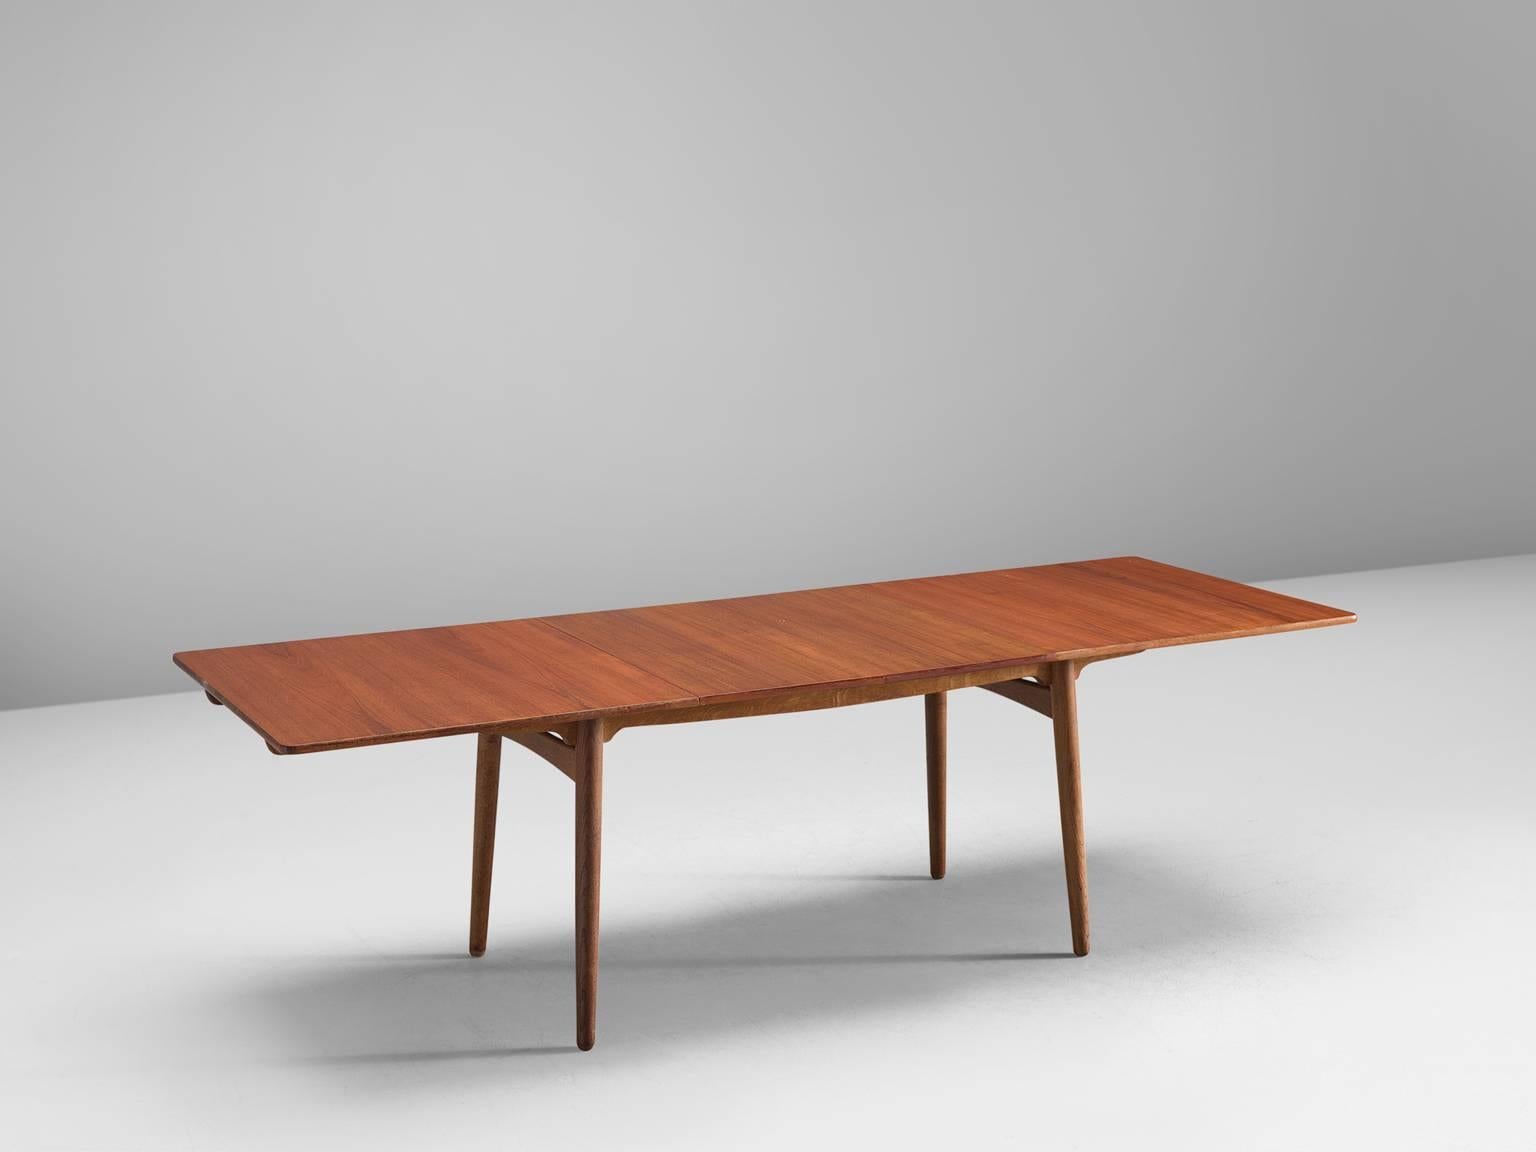 Hans J. Wegner for Andreas Tuck, 'AT-310', teak, Denmark, 1950s.

This extendable AT-310 dining table designed by Hans J. Wegner is made from teak and has extra leaves in order to expand the piece from a six-seat (160cm) to a ten-seat capacity (240